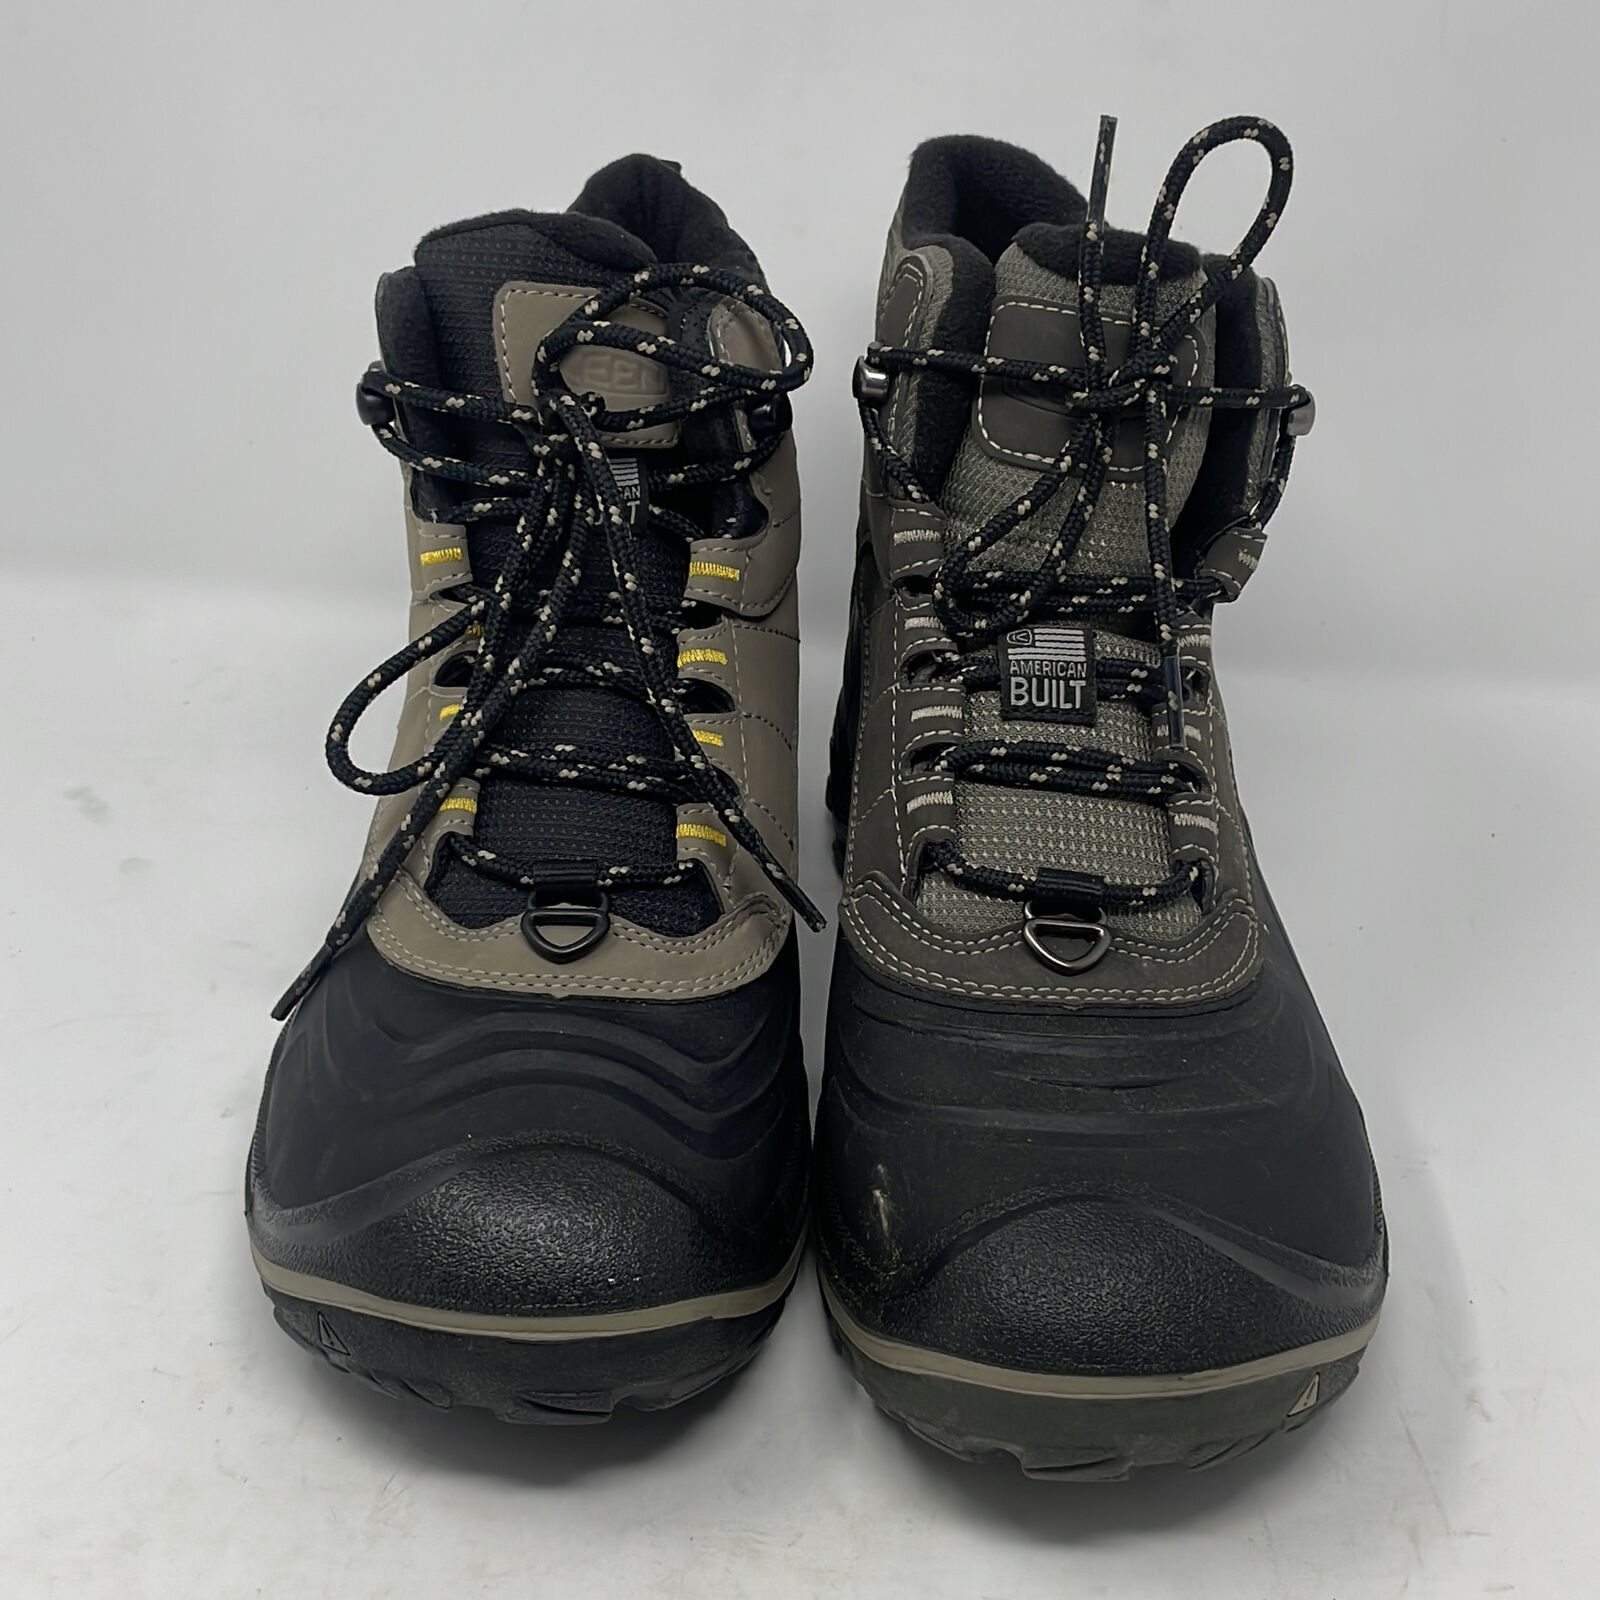 Keen Mens Durand Mismatched Black Lace Up Waterproof Hiking Boots Size 9 Sample